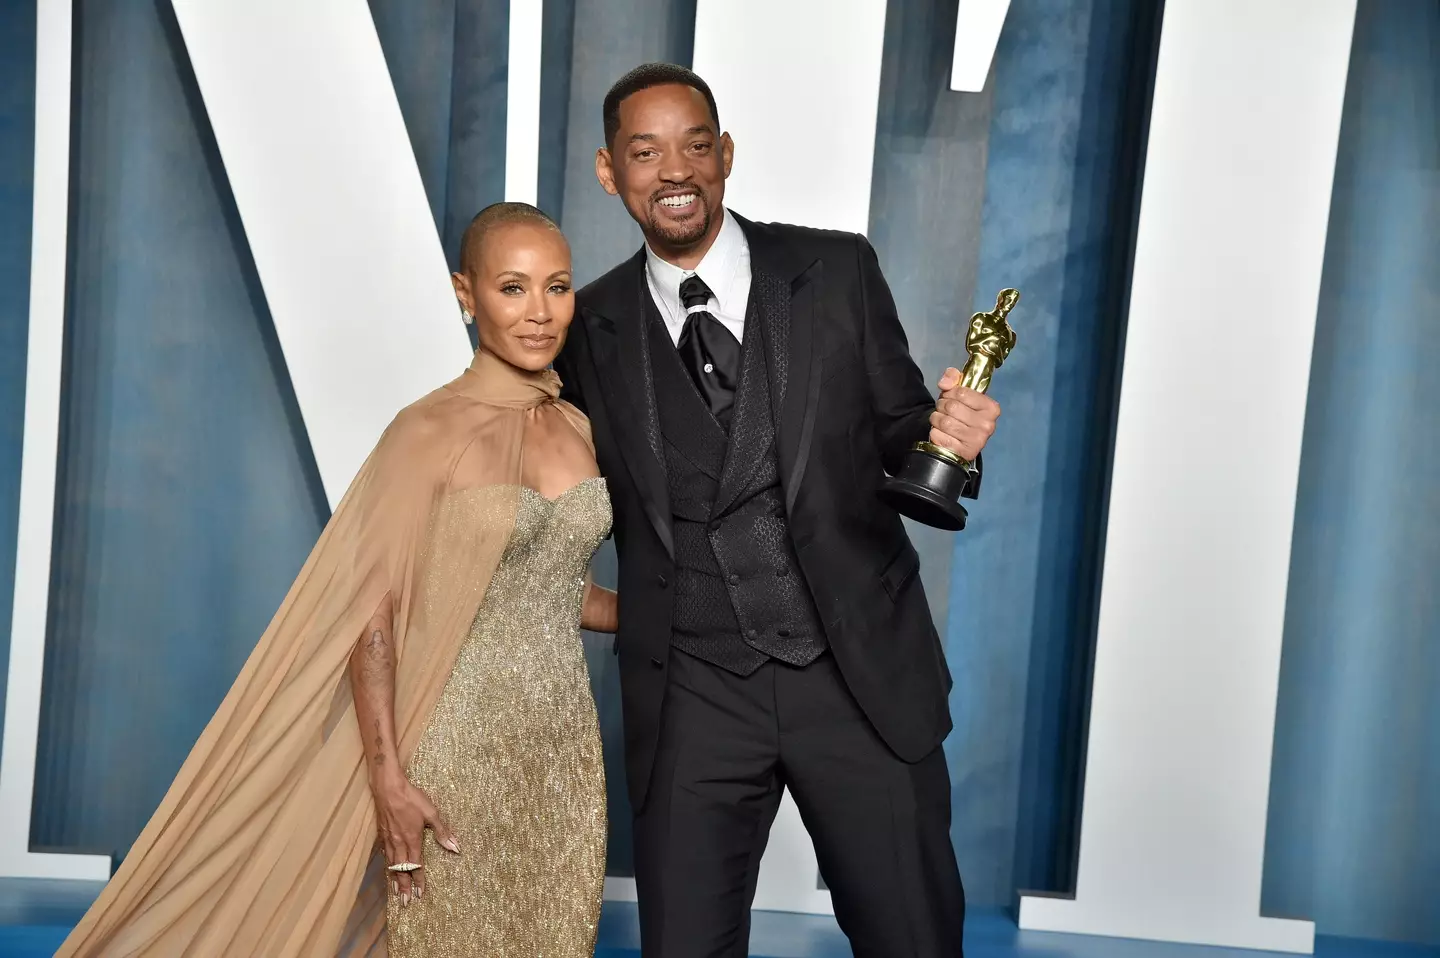 Will and Jada continued to make public appearances. (Lionel Hahn/Getty Images)